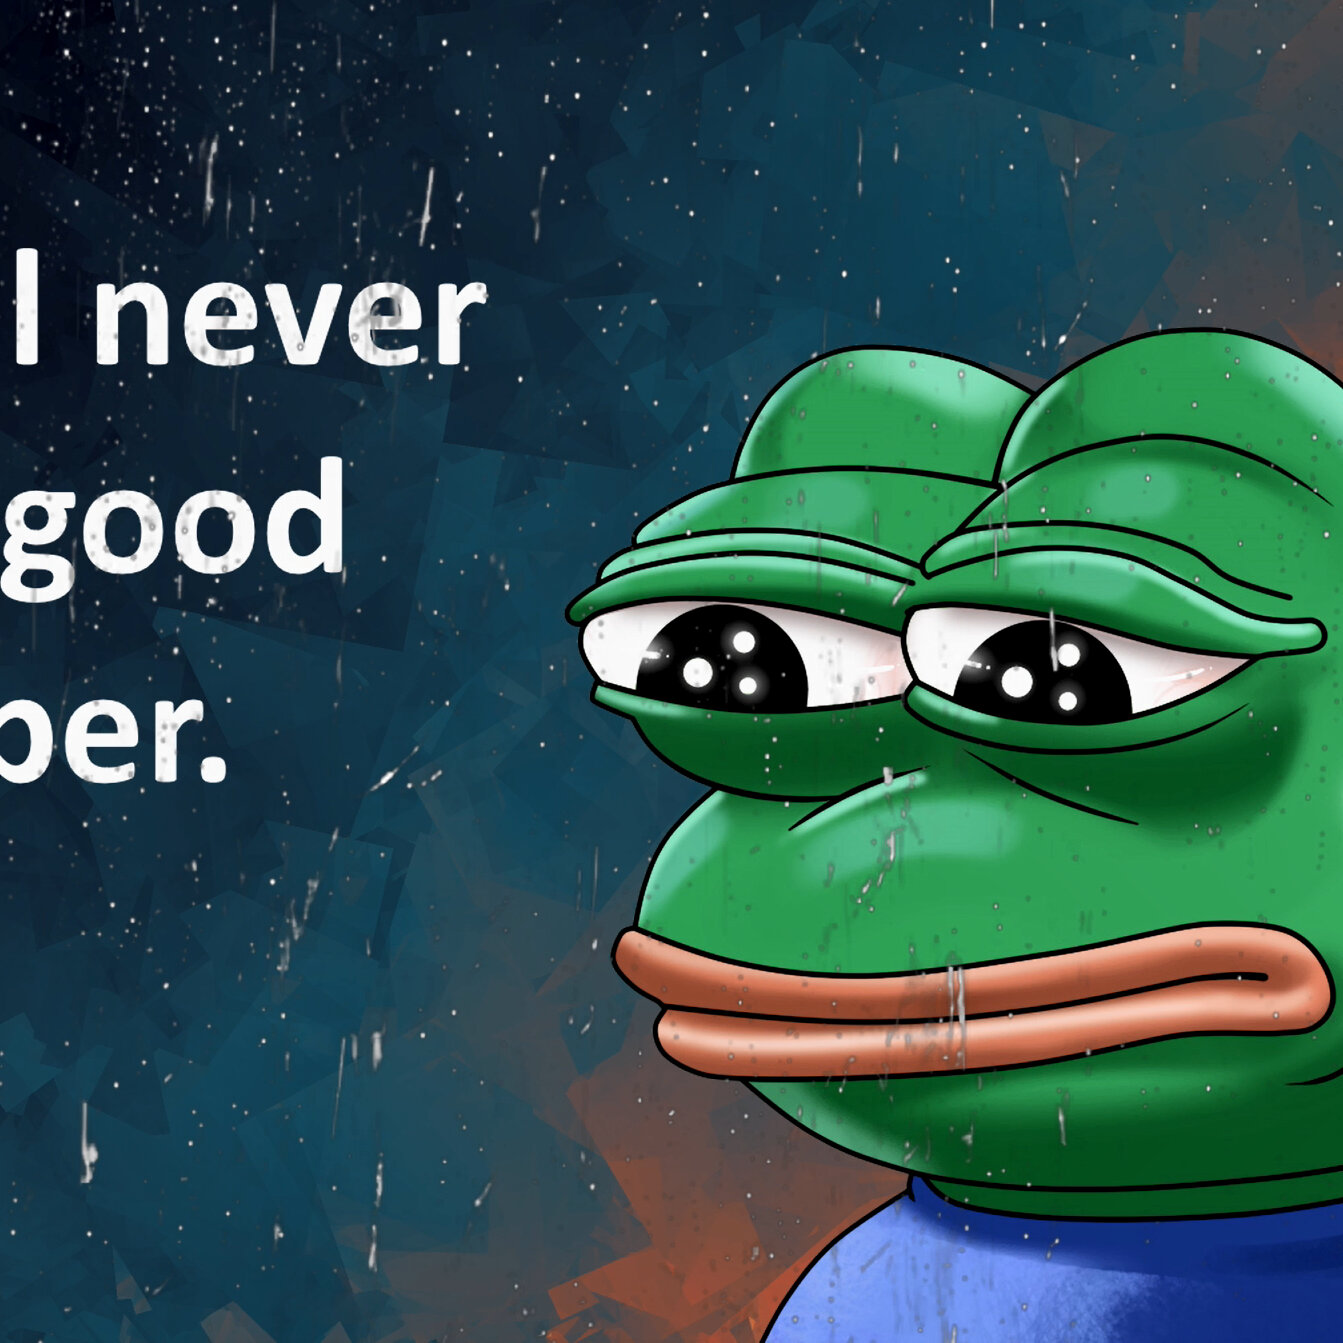 You Will Never Have A Good Wallpaper Pepe - HD Wallpaper 